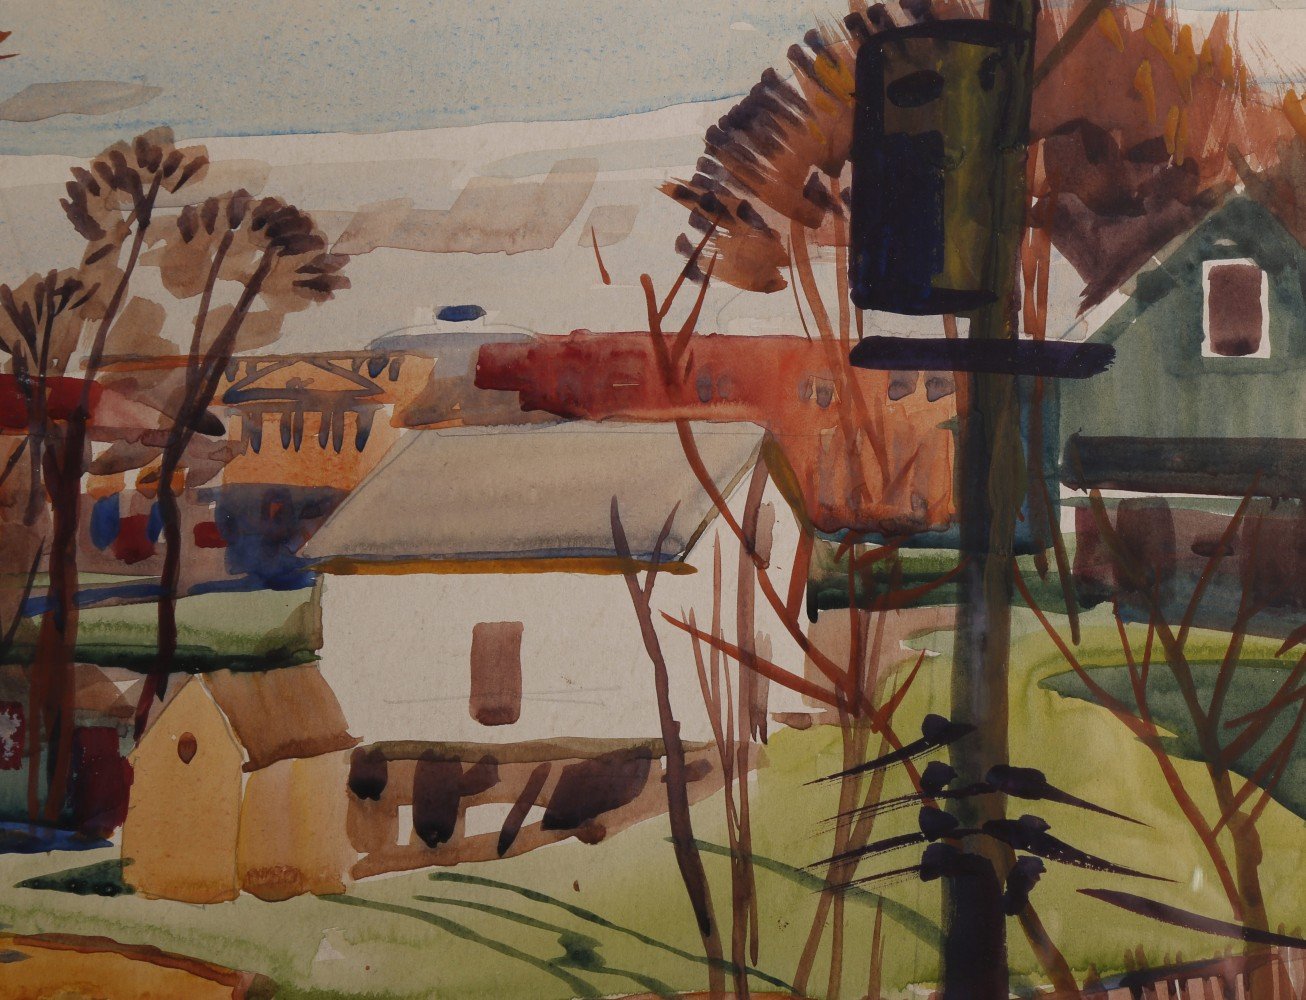 Landscape Watercolor and Graphite on Paper Painting: 